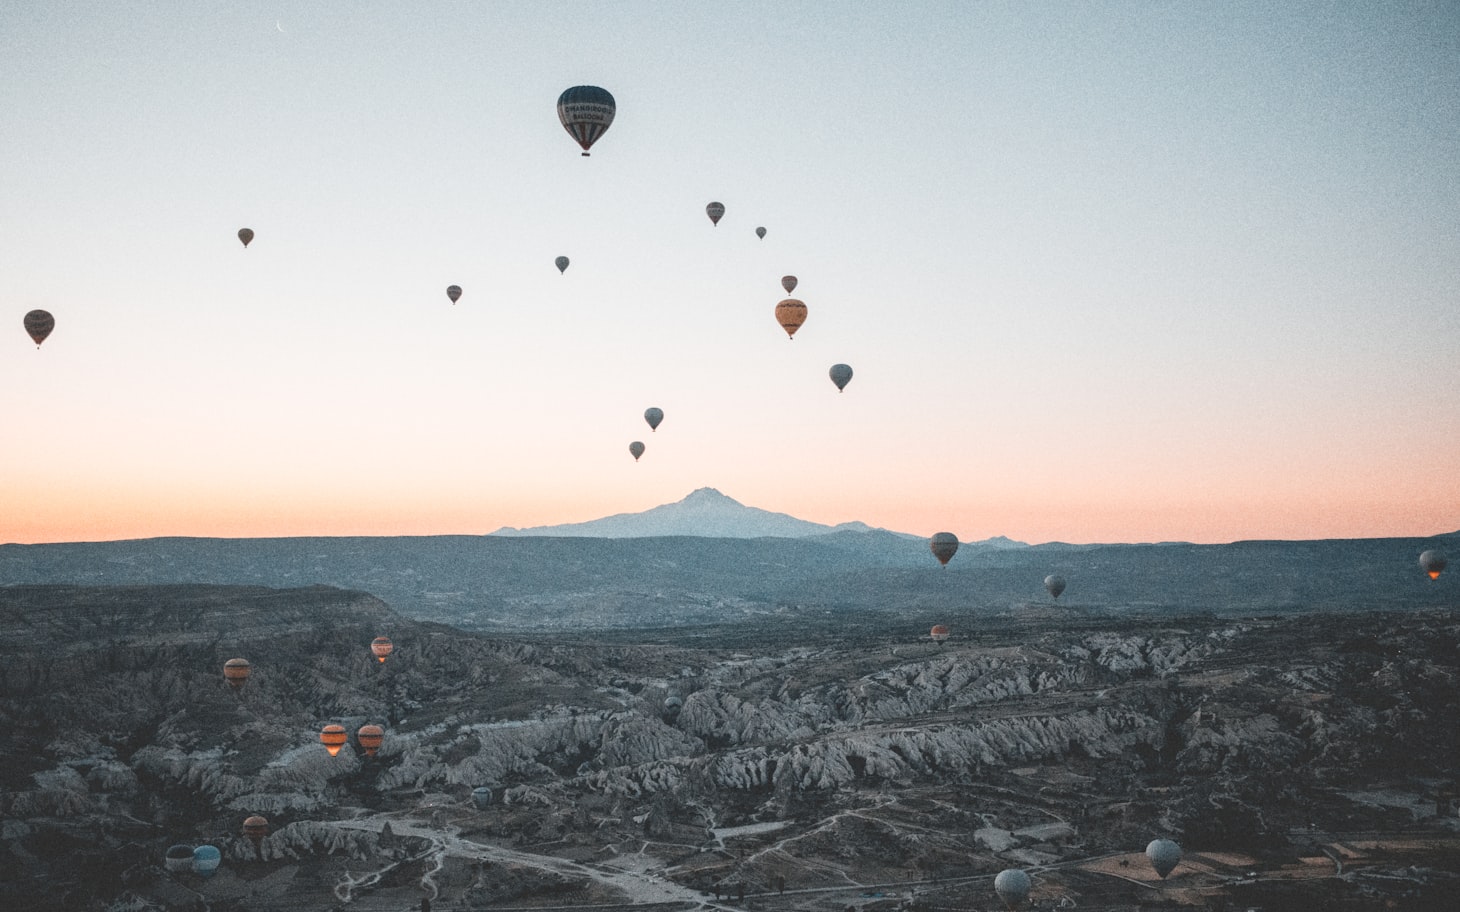 Bucket List Ideas: 200+ Epic Things To Do Before You Die